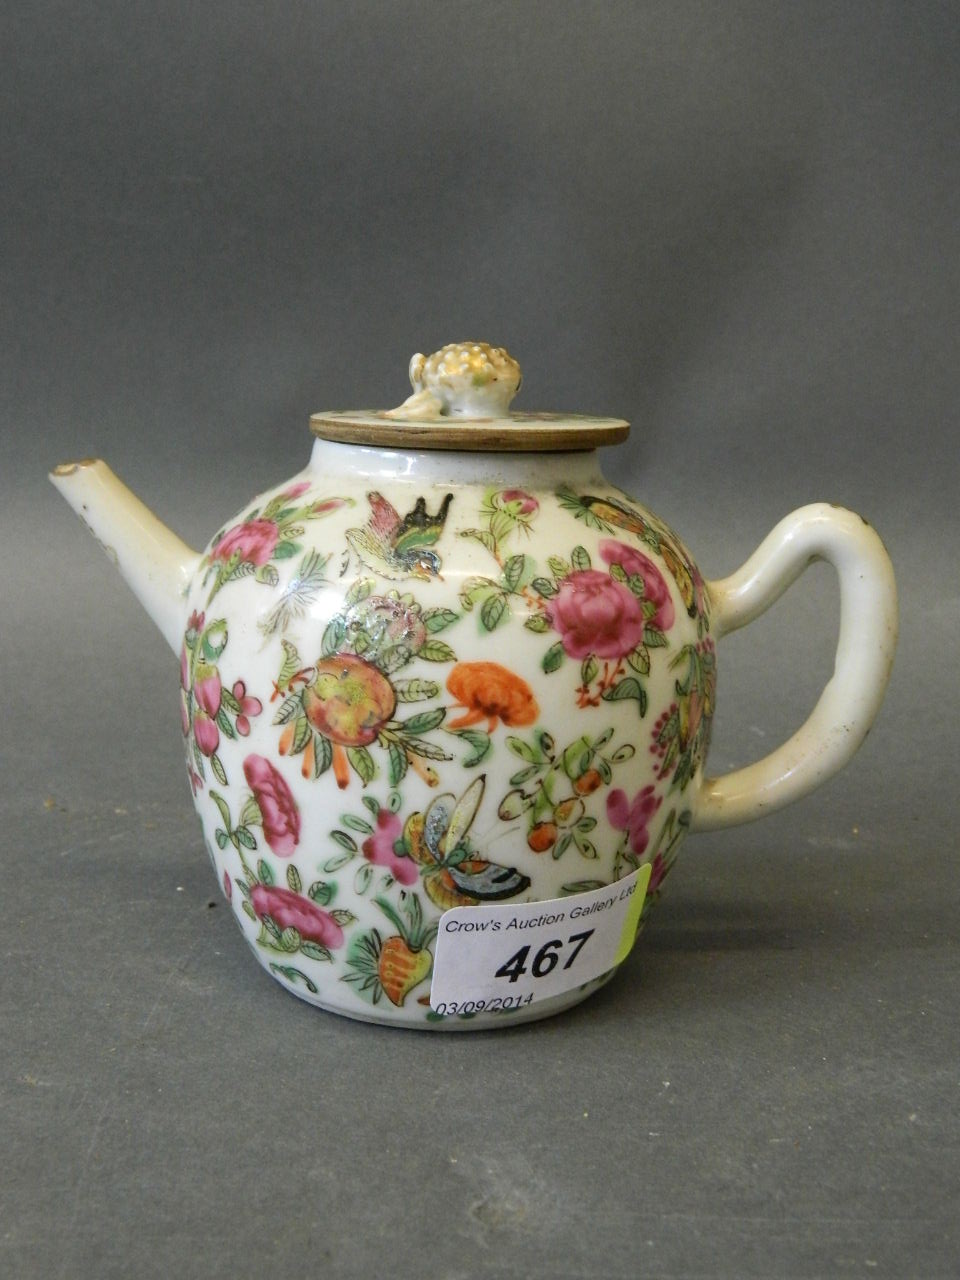 A late C19th Cantonese teapot painted in enamels with birds and butterflies, with gilt lotus